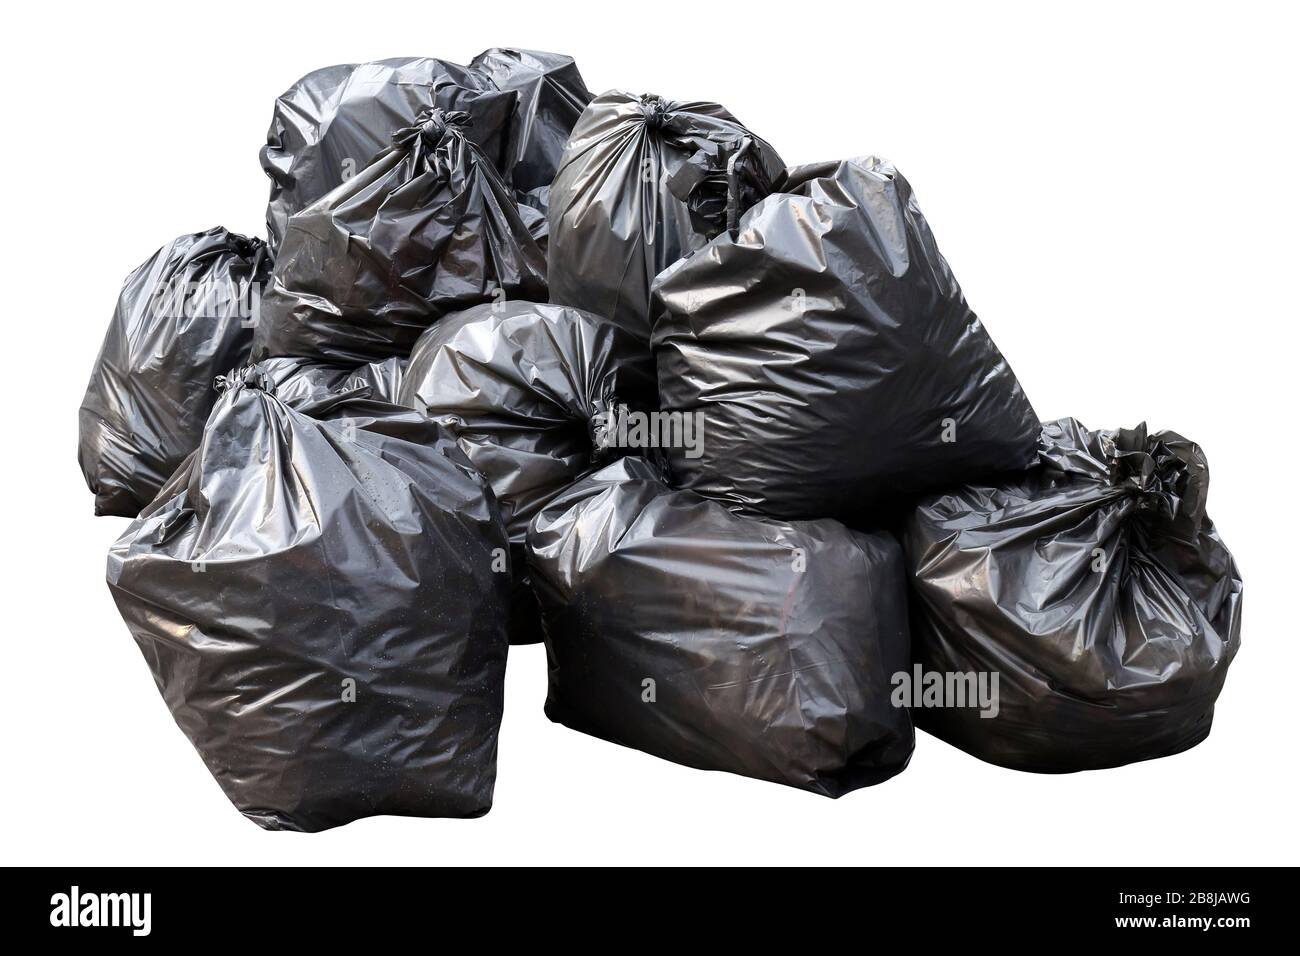 https://c8.alamy.com/comp/2B8JAWG/waste-black-garbage-bags-plastic-pile-stack-isolated-on-white-background-lots-pile-of-garbage-black-bags-stack-2B8JAWG.jpg